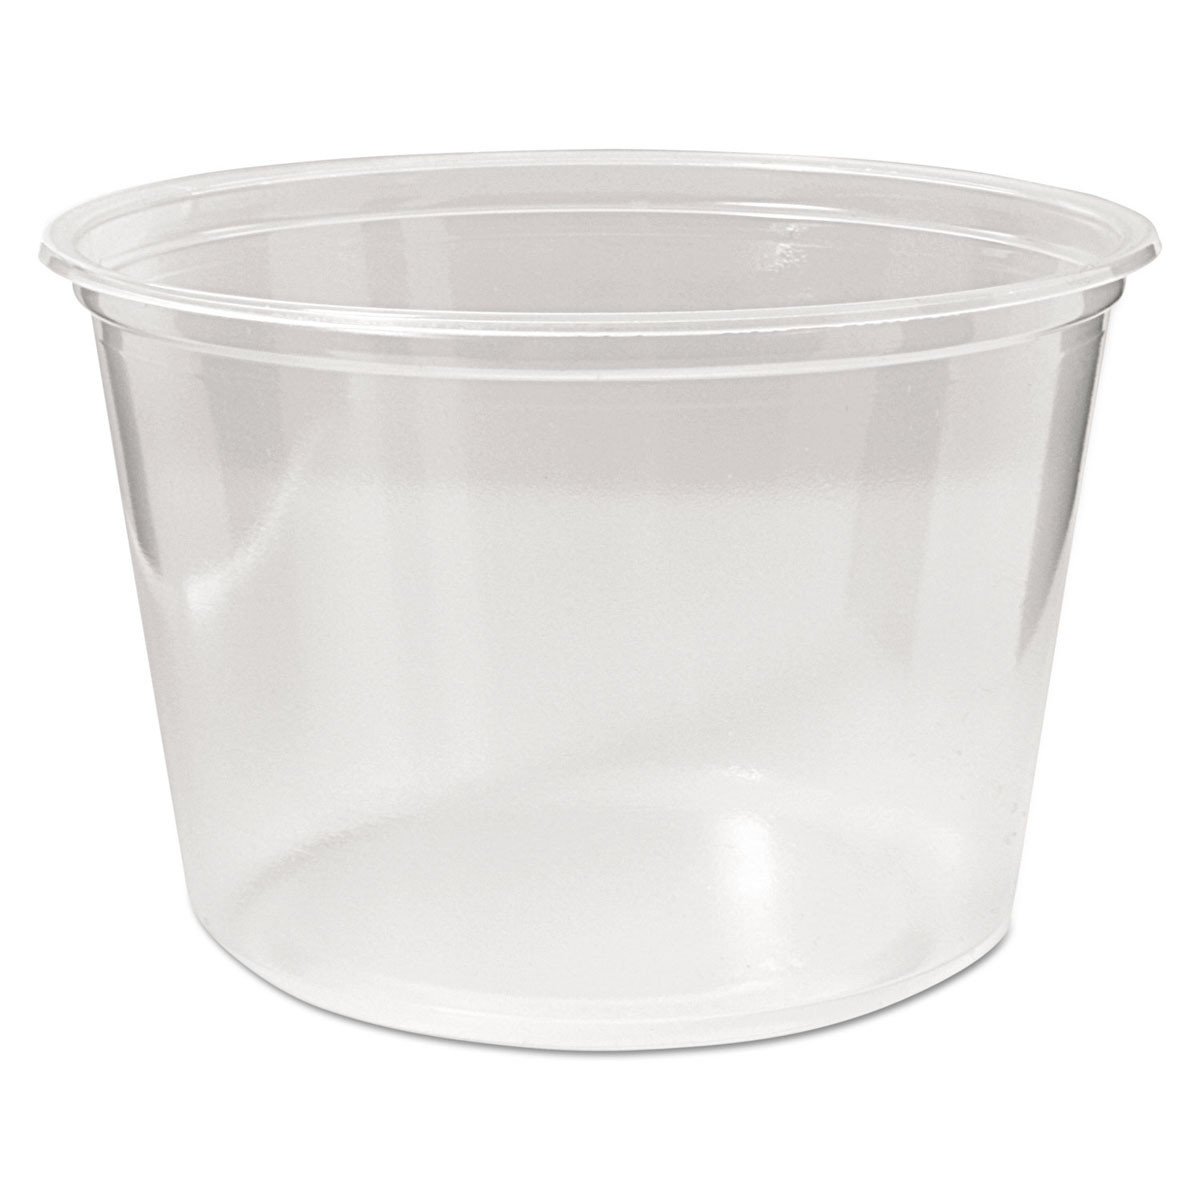 16oz DELI CONTAINER WITH LID - 5 x 2 1/2 TALL - 250/CASE - Wow